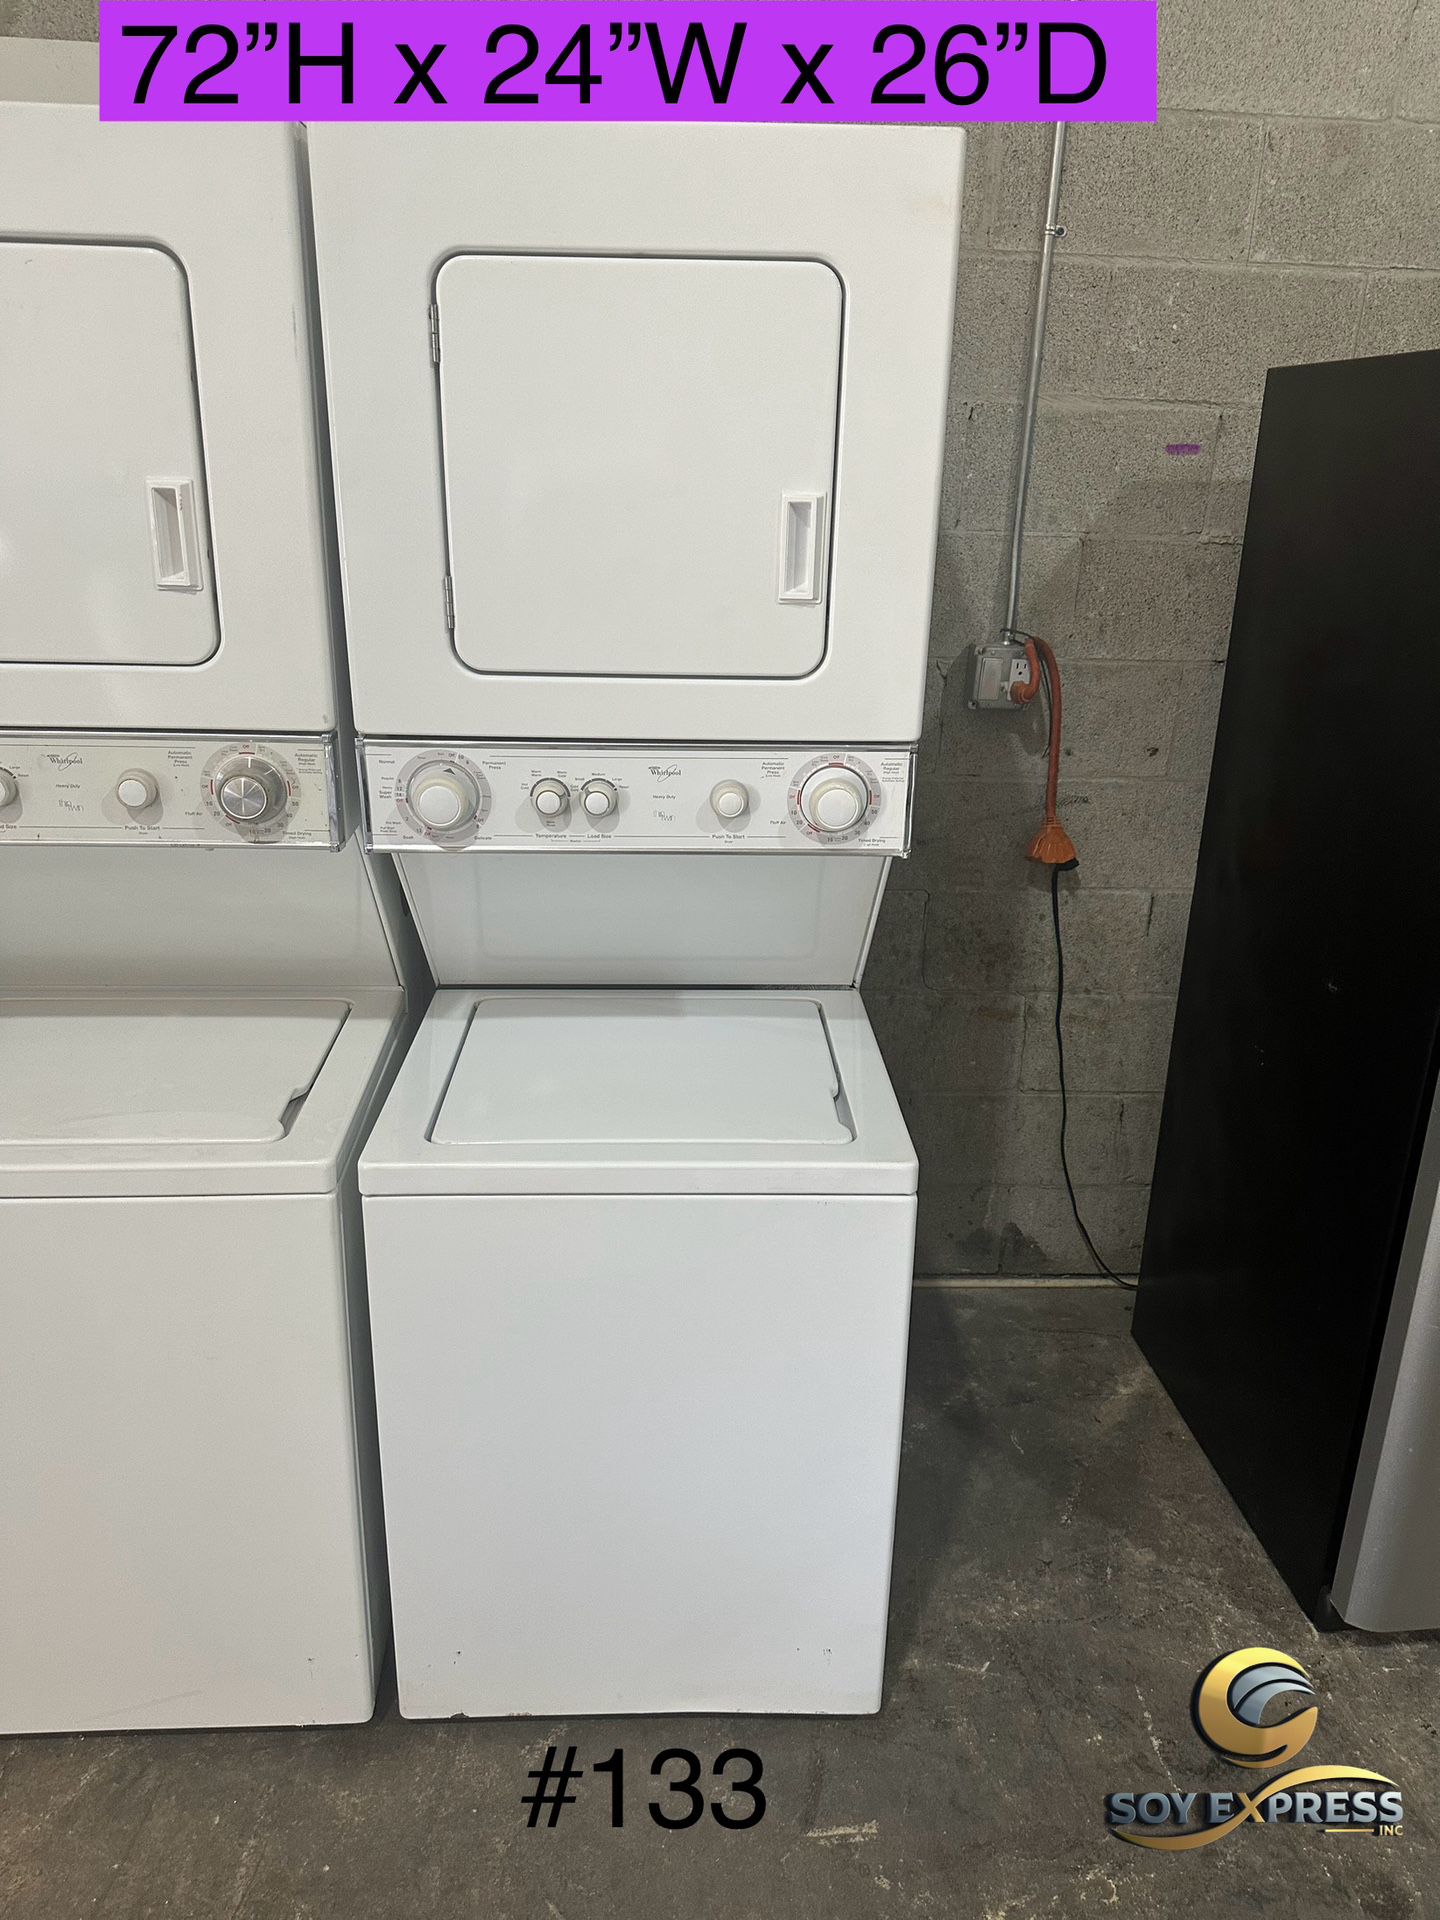 Whirlpool Combo 24”W ( Washer And Dryer) 🚨$300 For PICKUP 🚨$350 For DELIVERY🚨